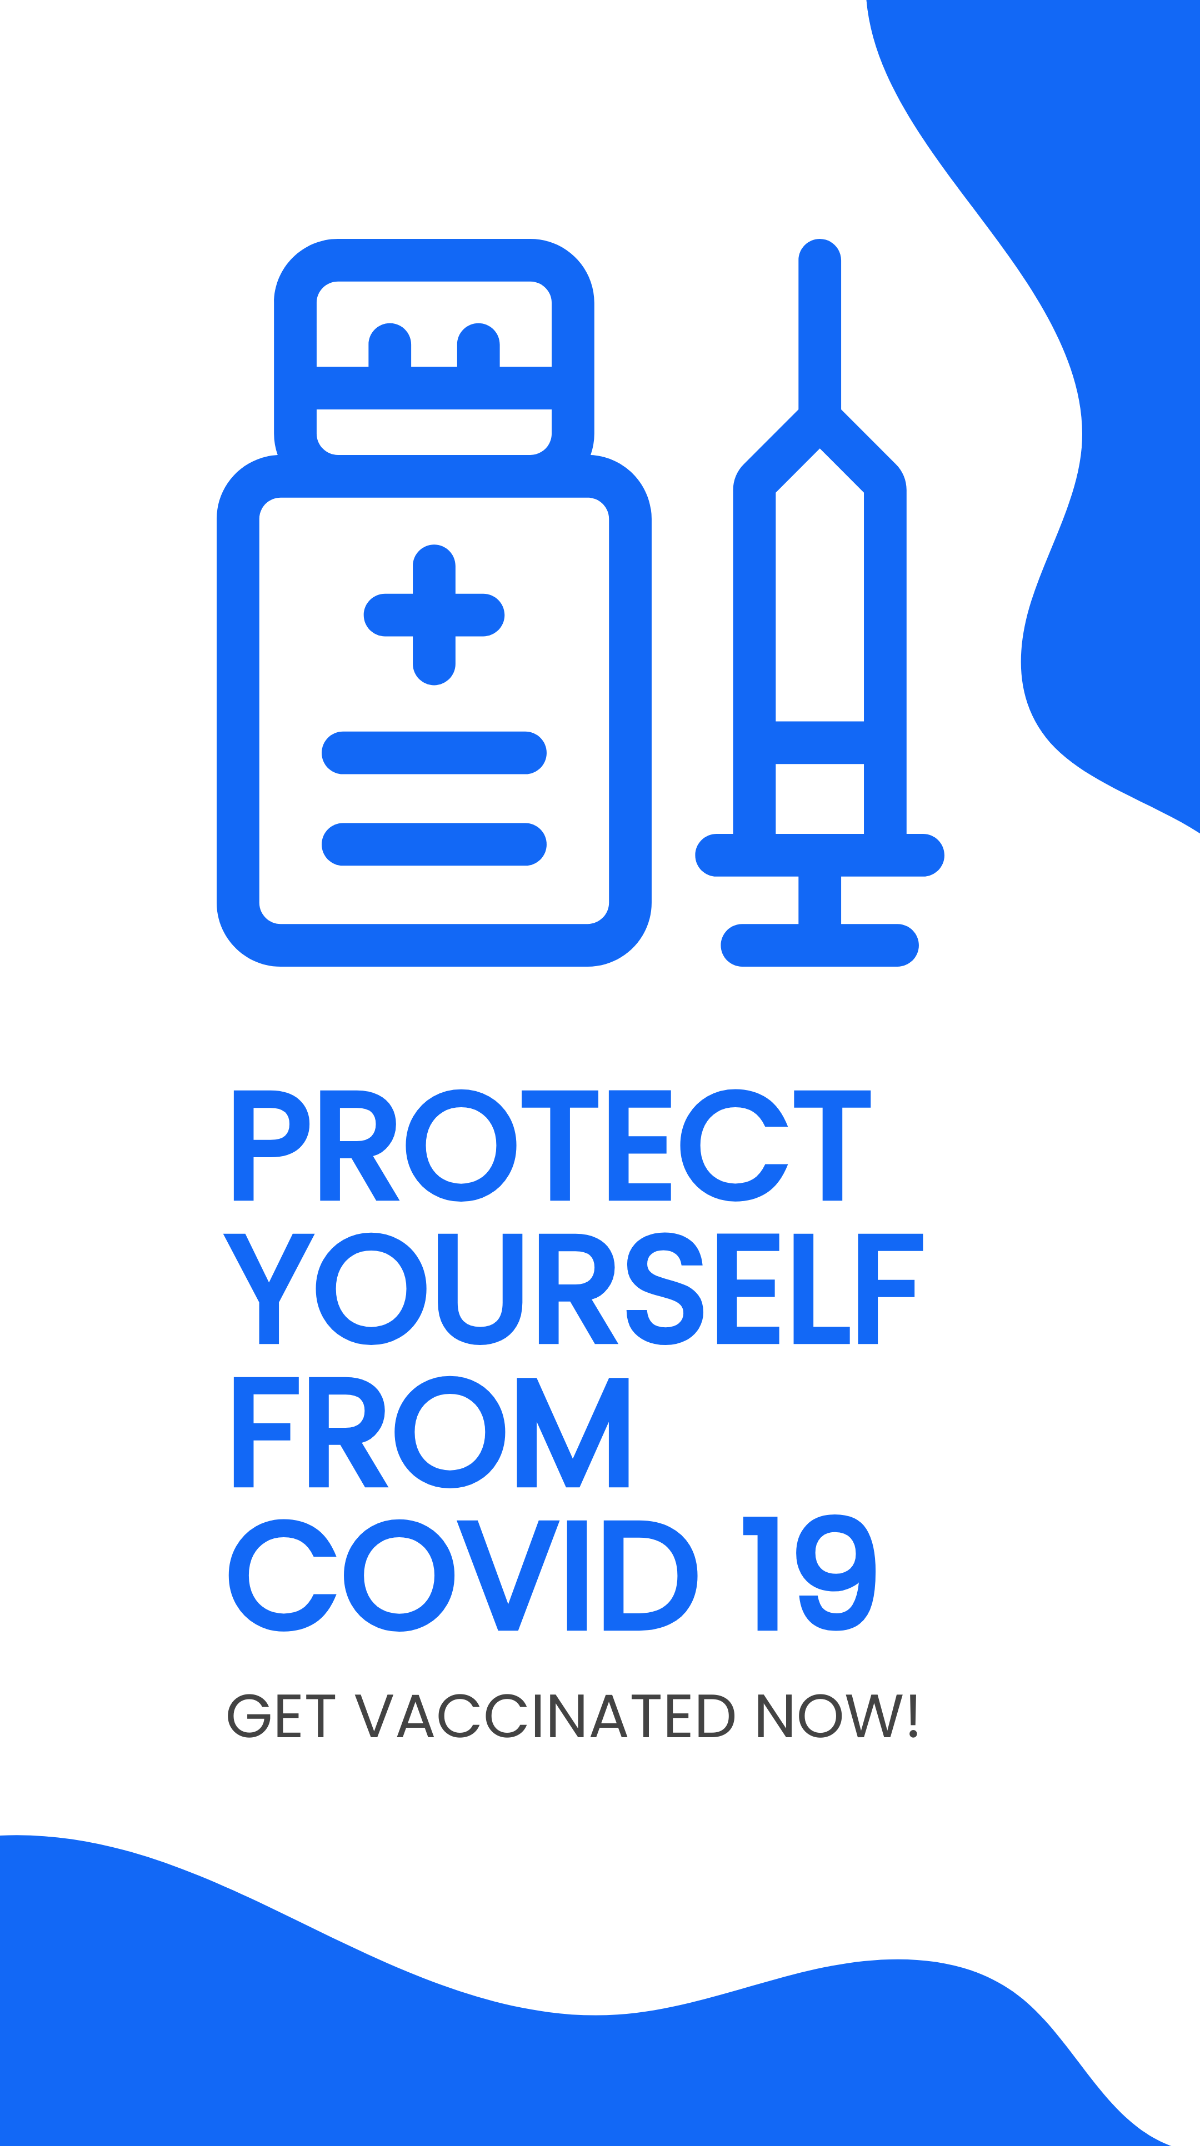 Free Covid 19 Vaccine Available Instagram Story Template